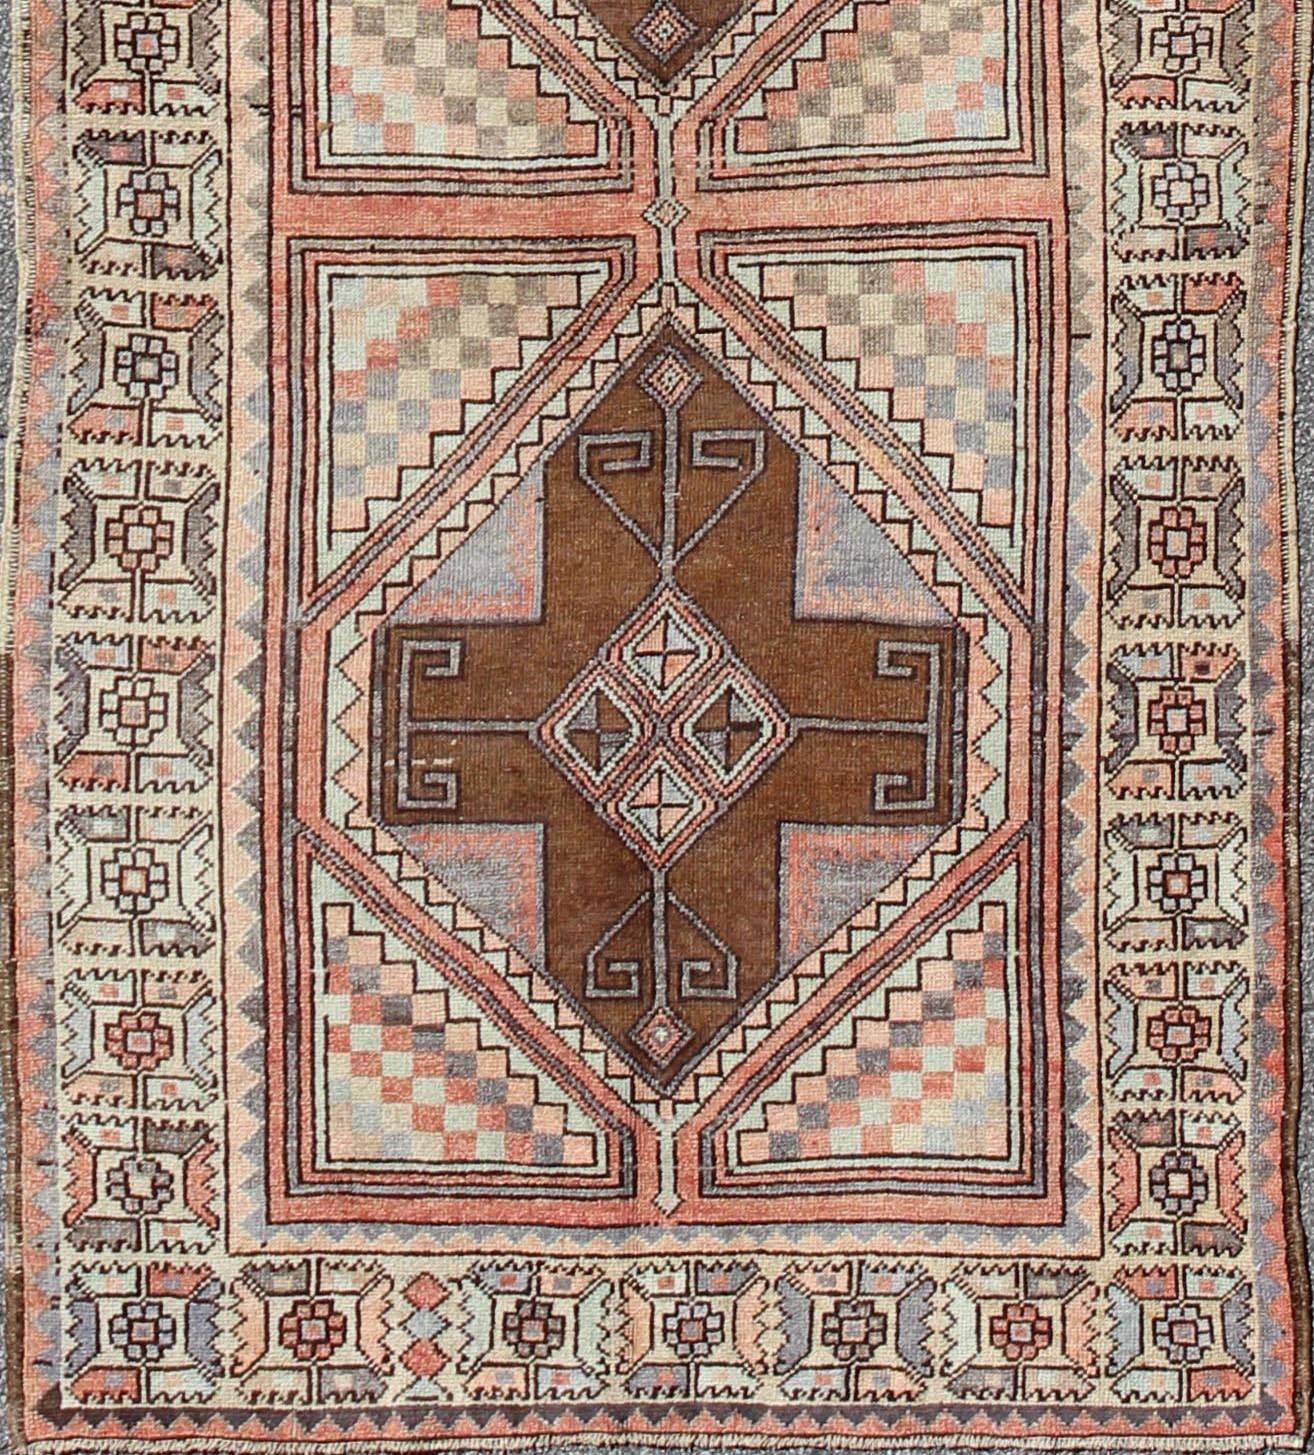 Multicolored pastel vintage Turkish Oushak runner with cross shapes design, rug en-142351, country of origin / type: Turkey / Oushak, circa 1940

This vintage Turkish Oushak runner (circa 1940) features a unique blend of colors and an intricately